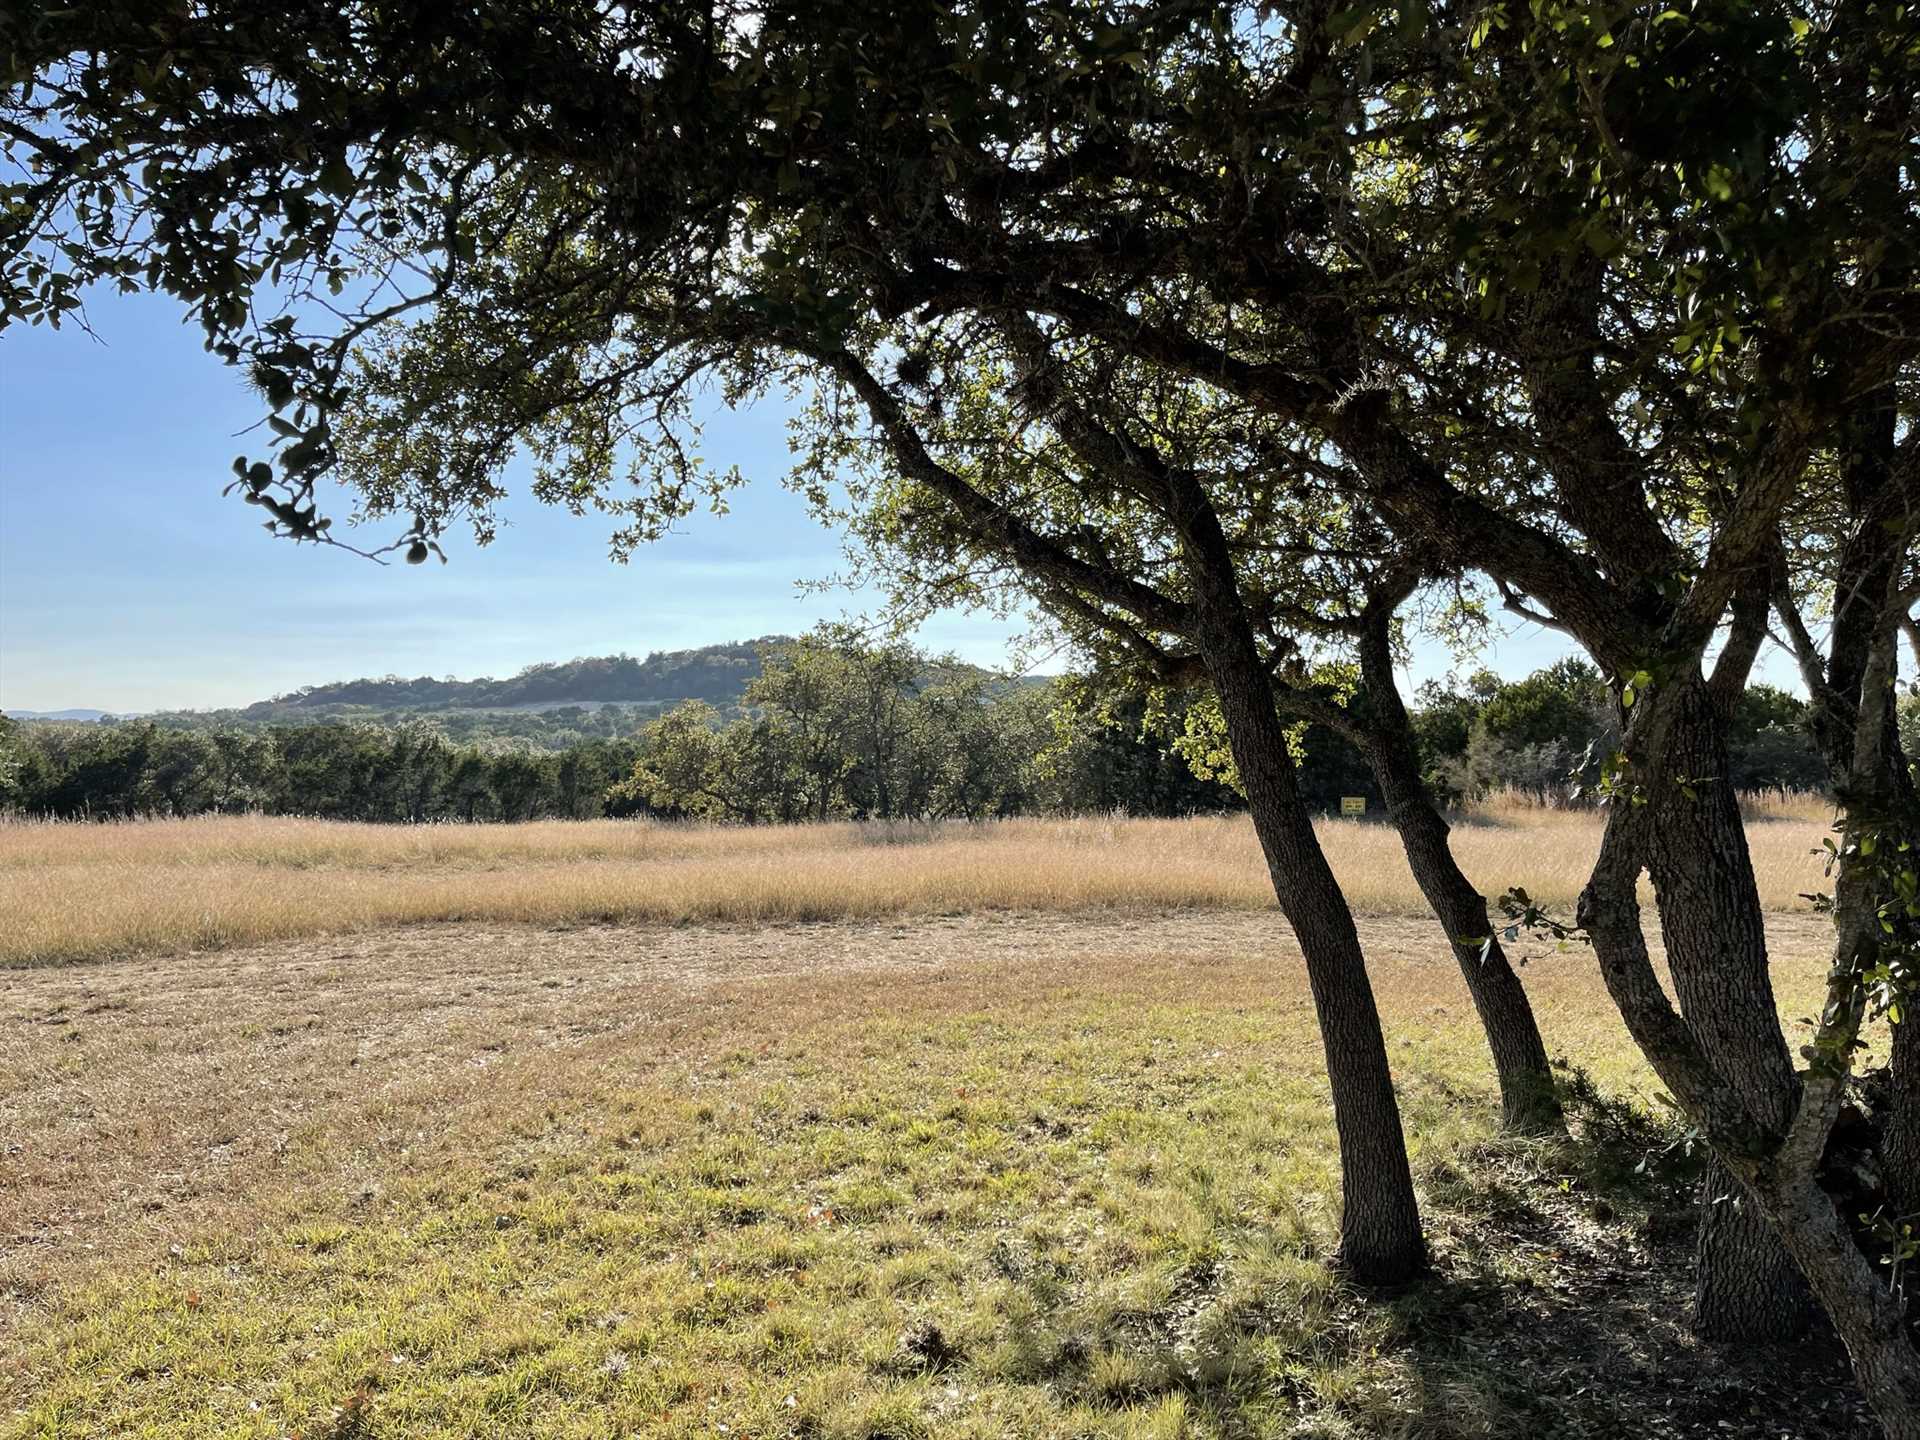                                                 The property is perfect for wildlife watching and stargazing...not to mention those brilliantly-colored Hill Country sunsets!